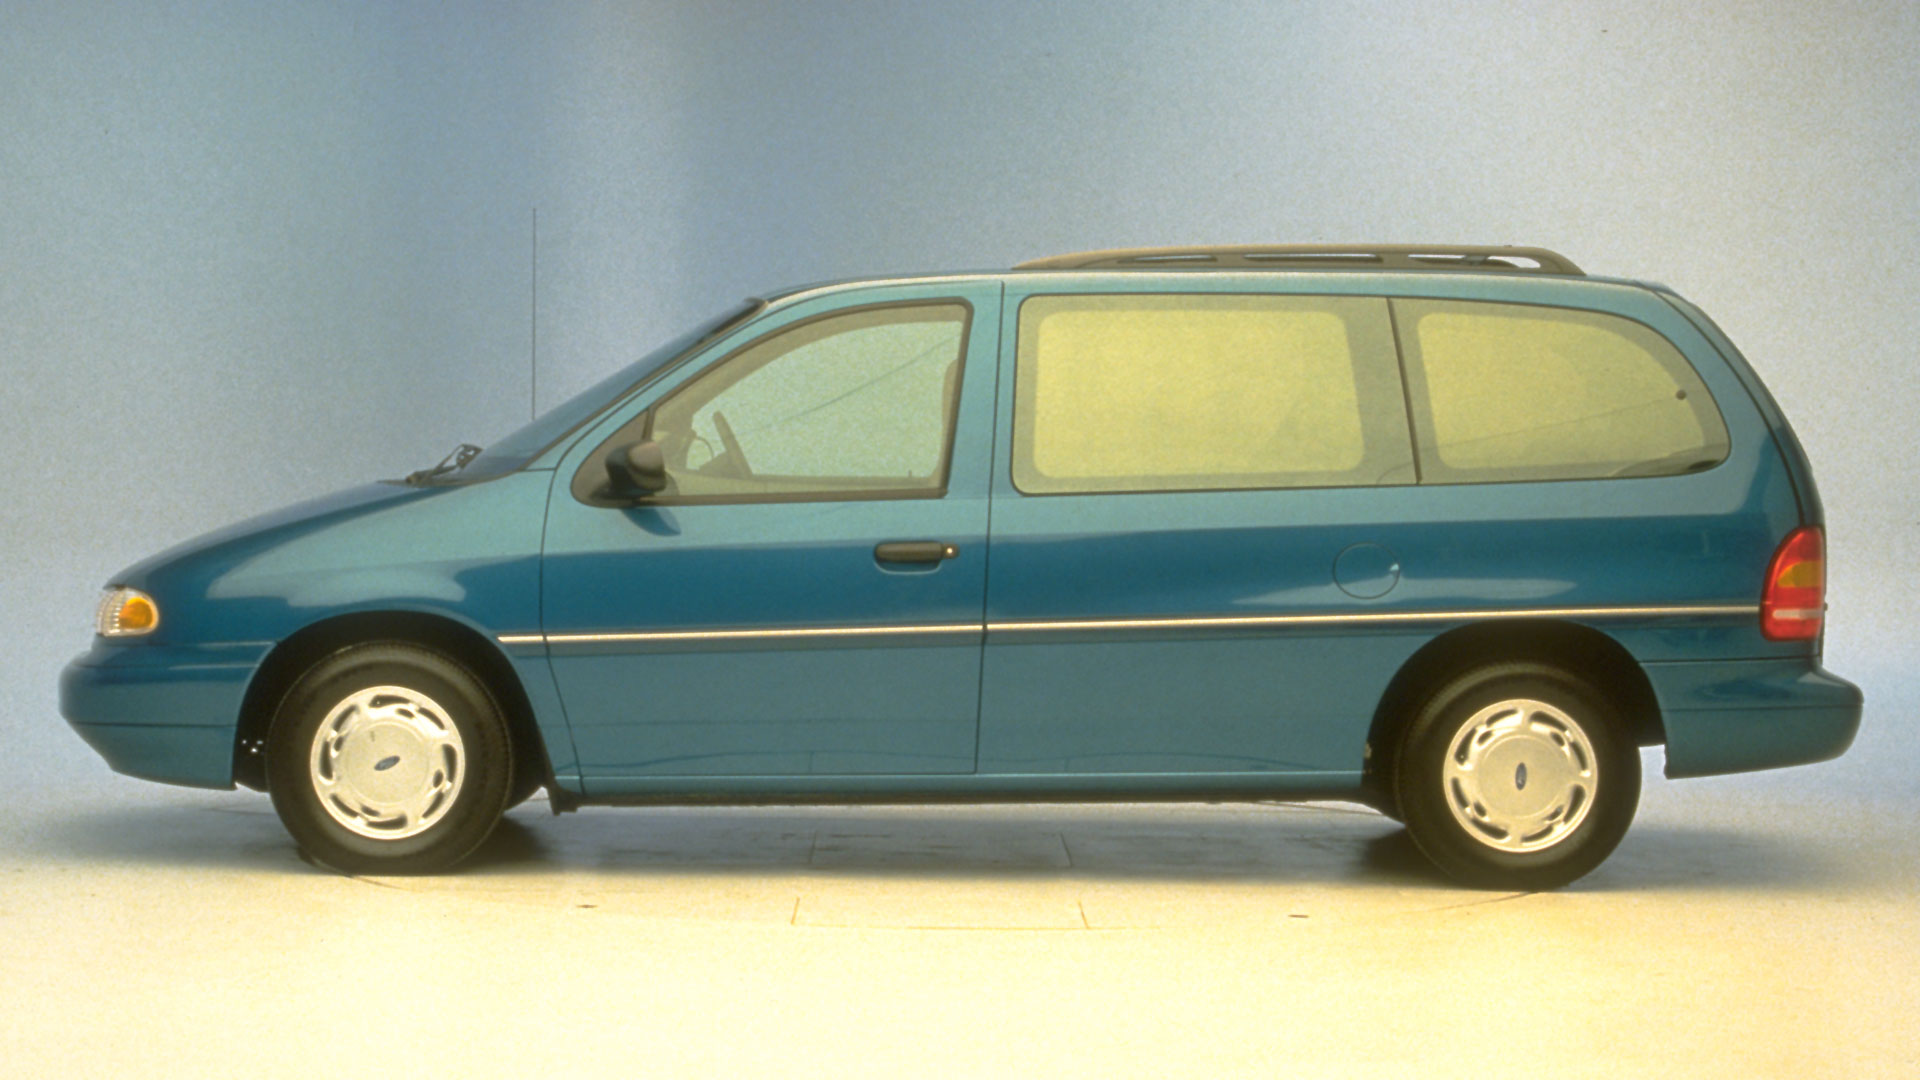 1996 Ford Windstar